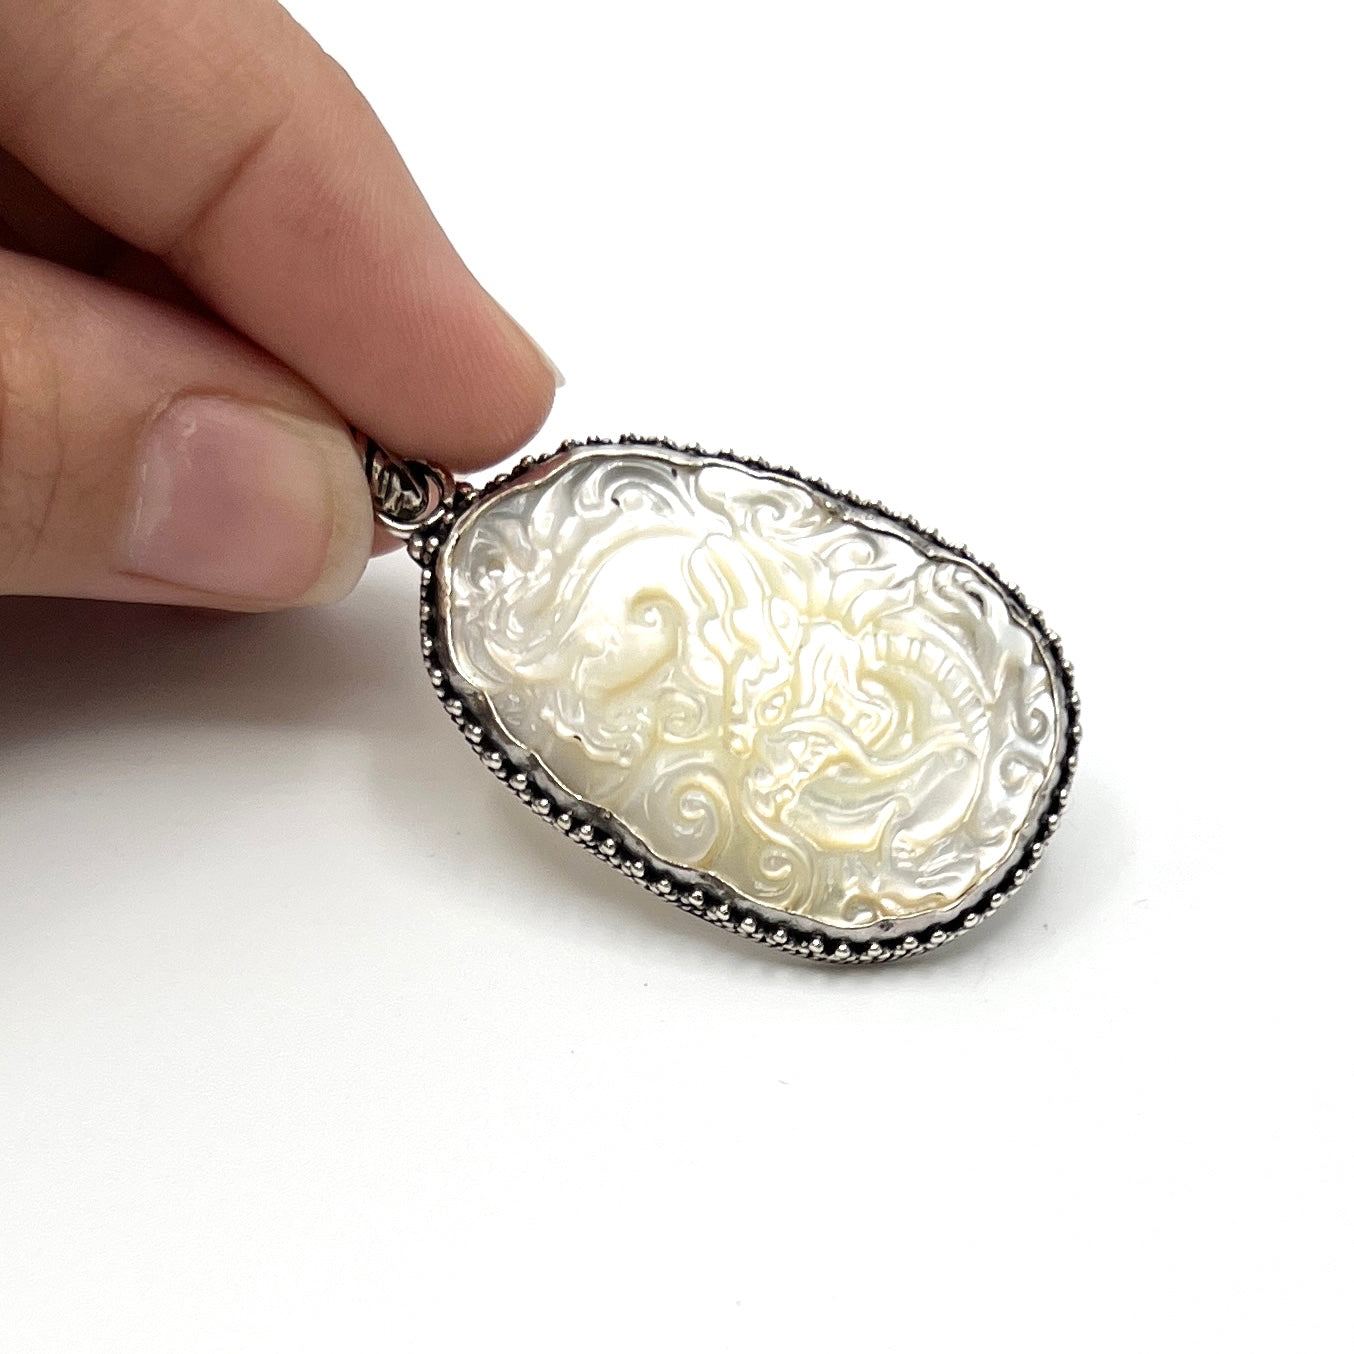 Mother of Pearl Dragon Pendants